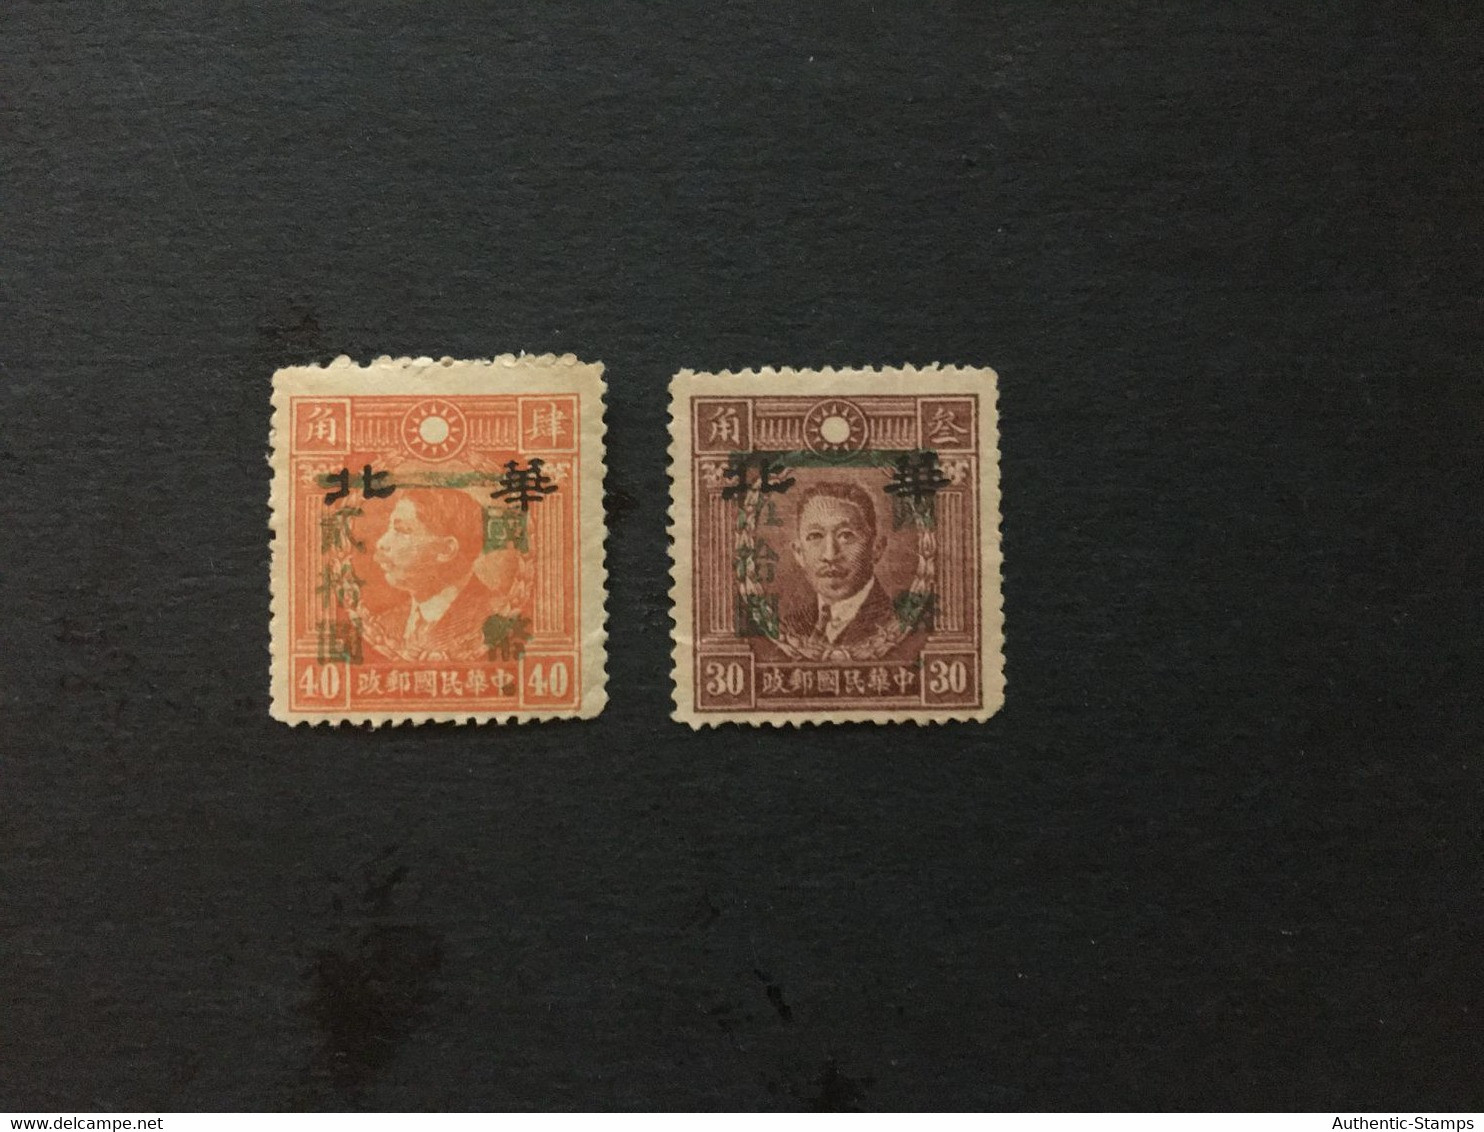 CHINA Local Stamp SET, Unused, RARE OVERPRINT, Japanese OCCUPATION, CINA, CHINE,  LIST 263 - 1941-45 Cina Del Nord